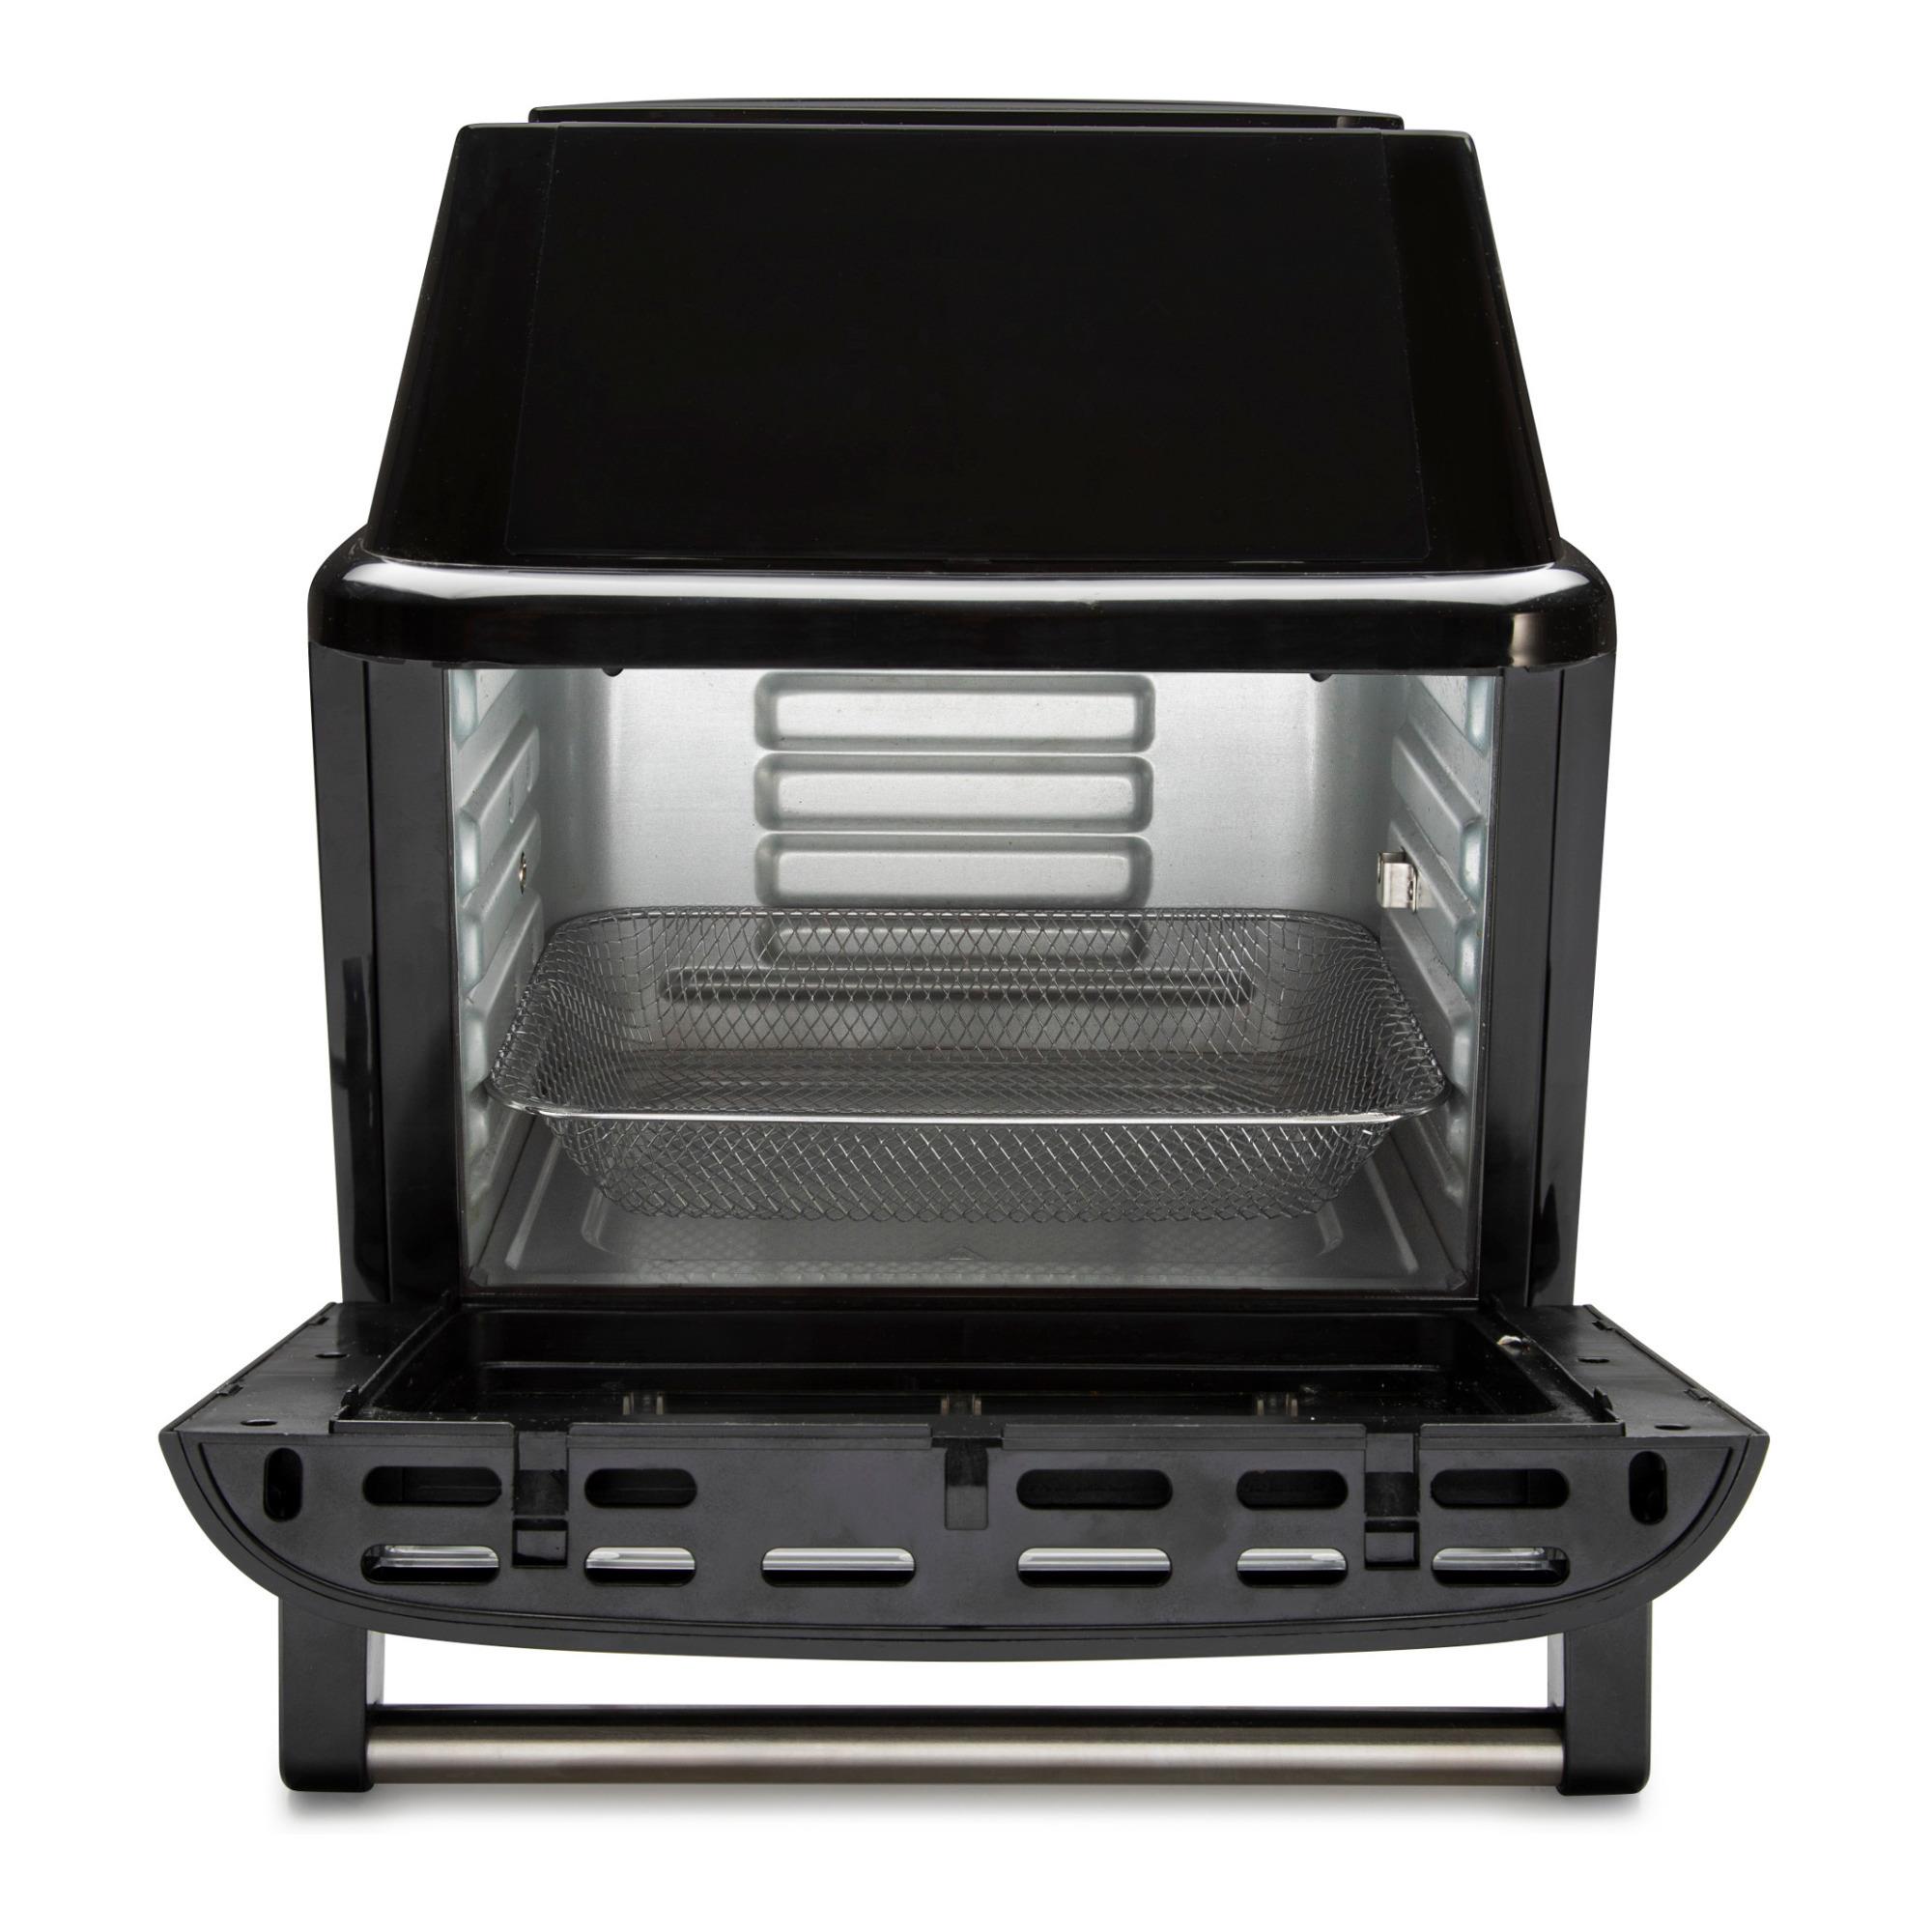 ChefWave Magma 16 qt. Multifunctional Air Fryer Oven with Rotisserie, Dehydrator and Accessories - image 5 of 13